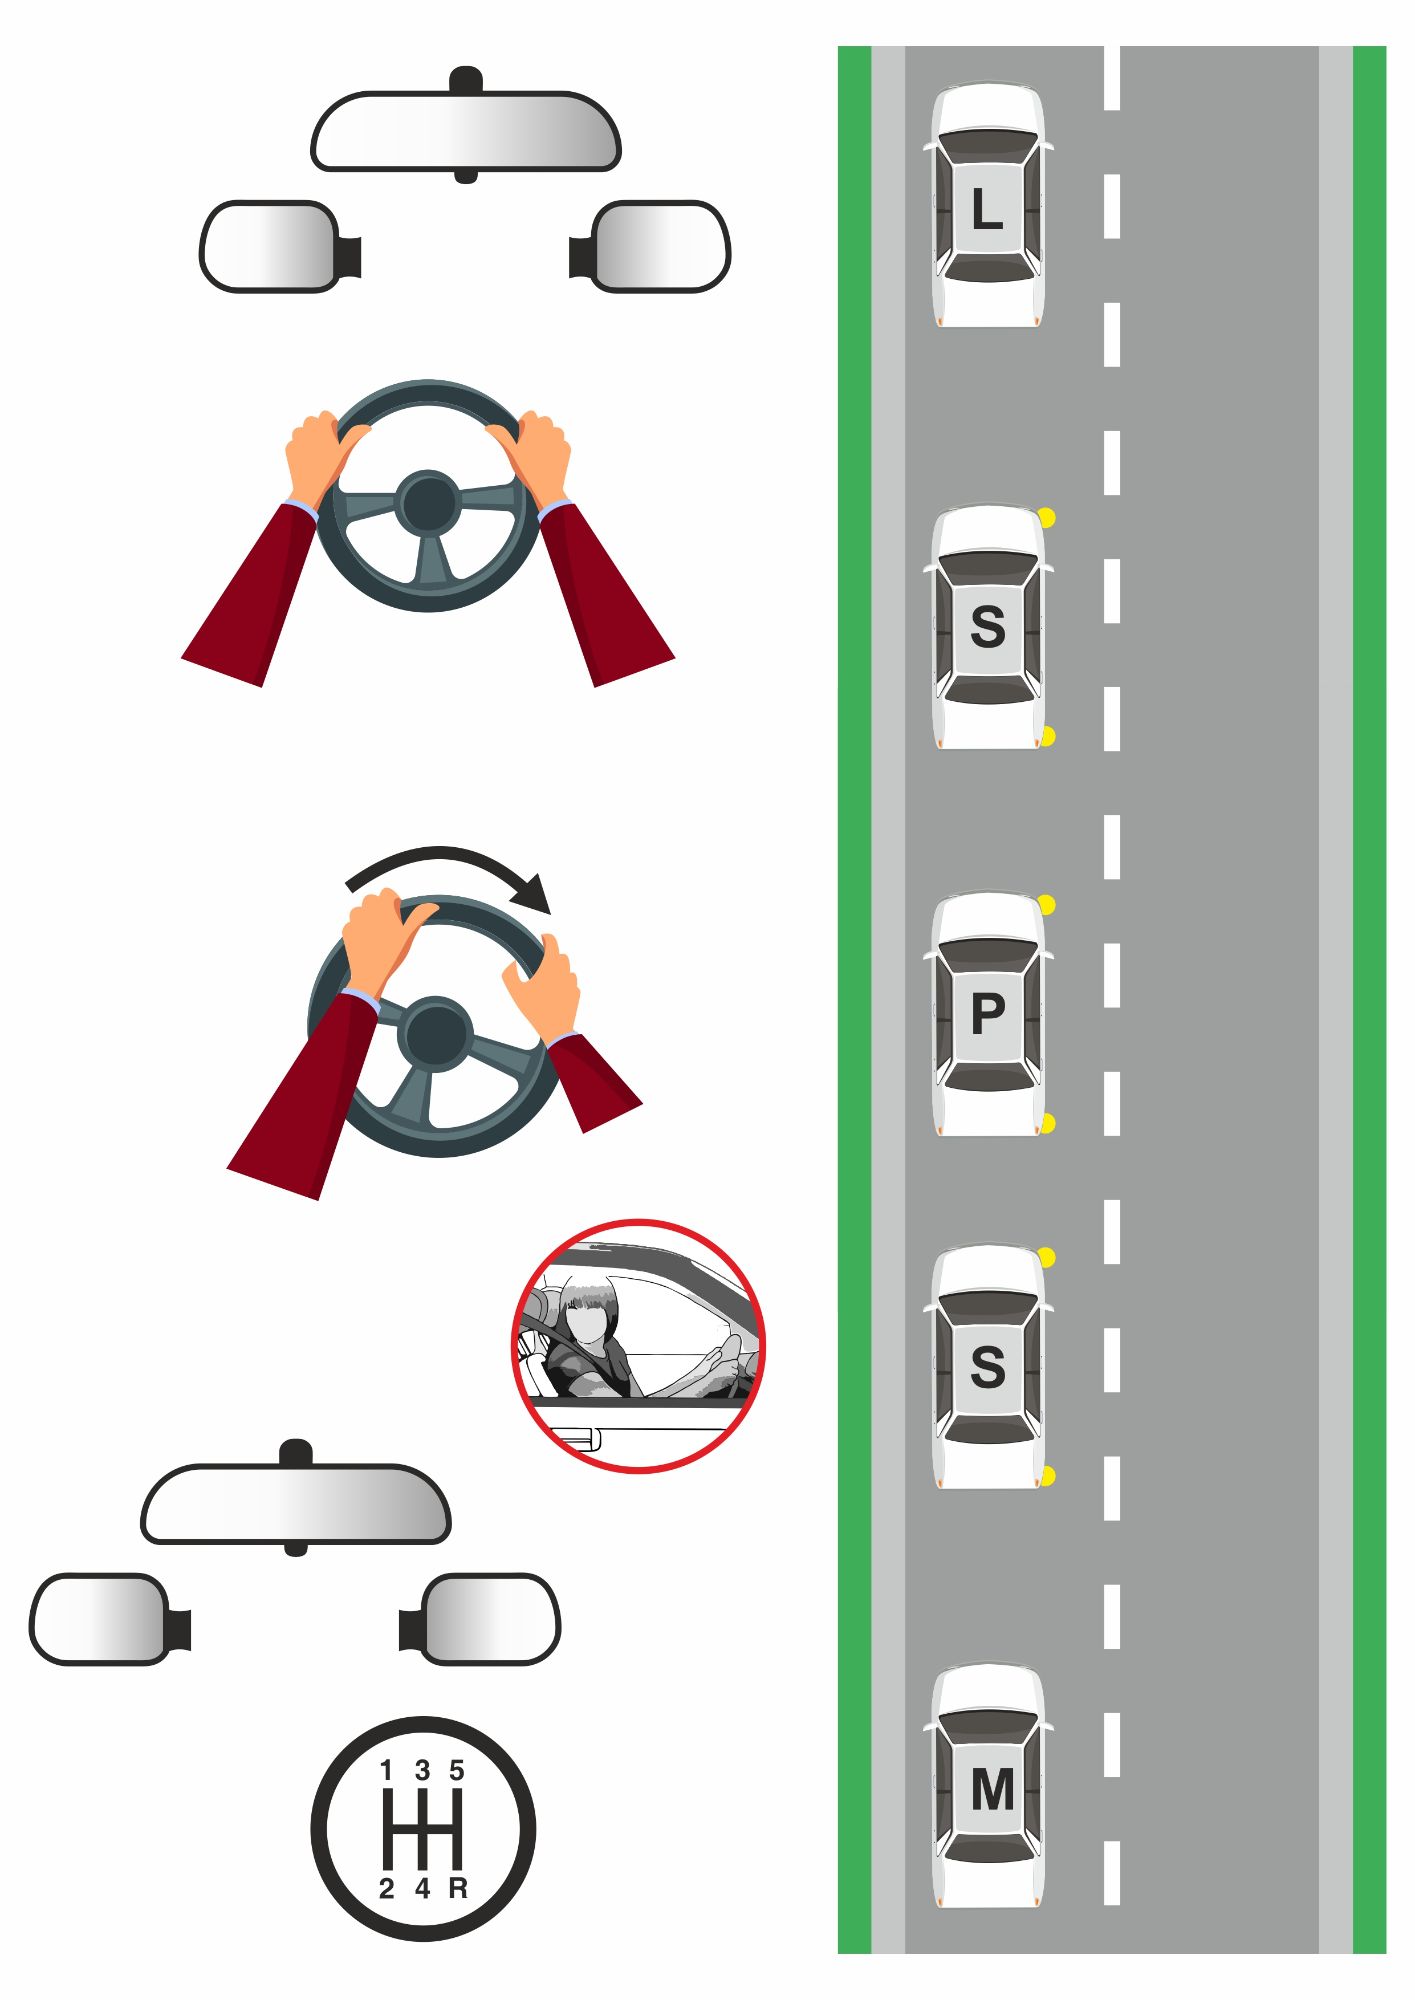 Once you have stopped the examiner will normally say "When it is safe to, please drive on"  So first its POM  Preparation - Into first gear and get the bite point  Observation - Centre and right mirror  Right shoulder Blindspot  Movement - Signal up and if its safe to release the handbrake and drive on